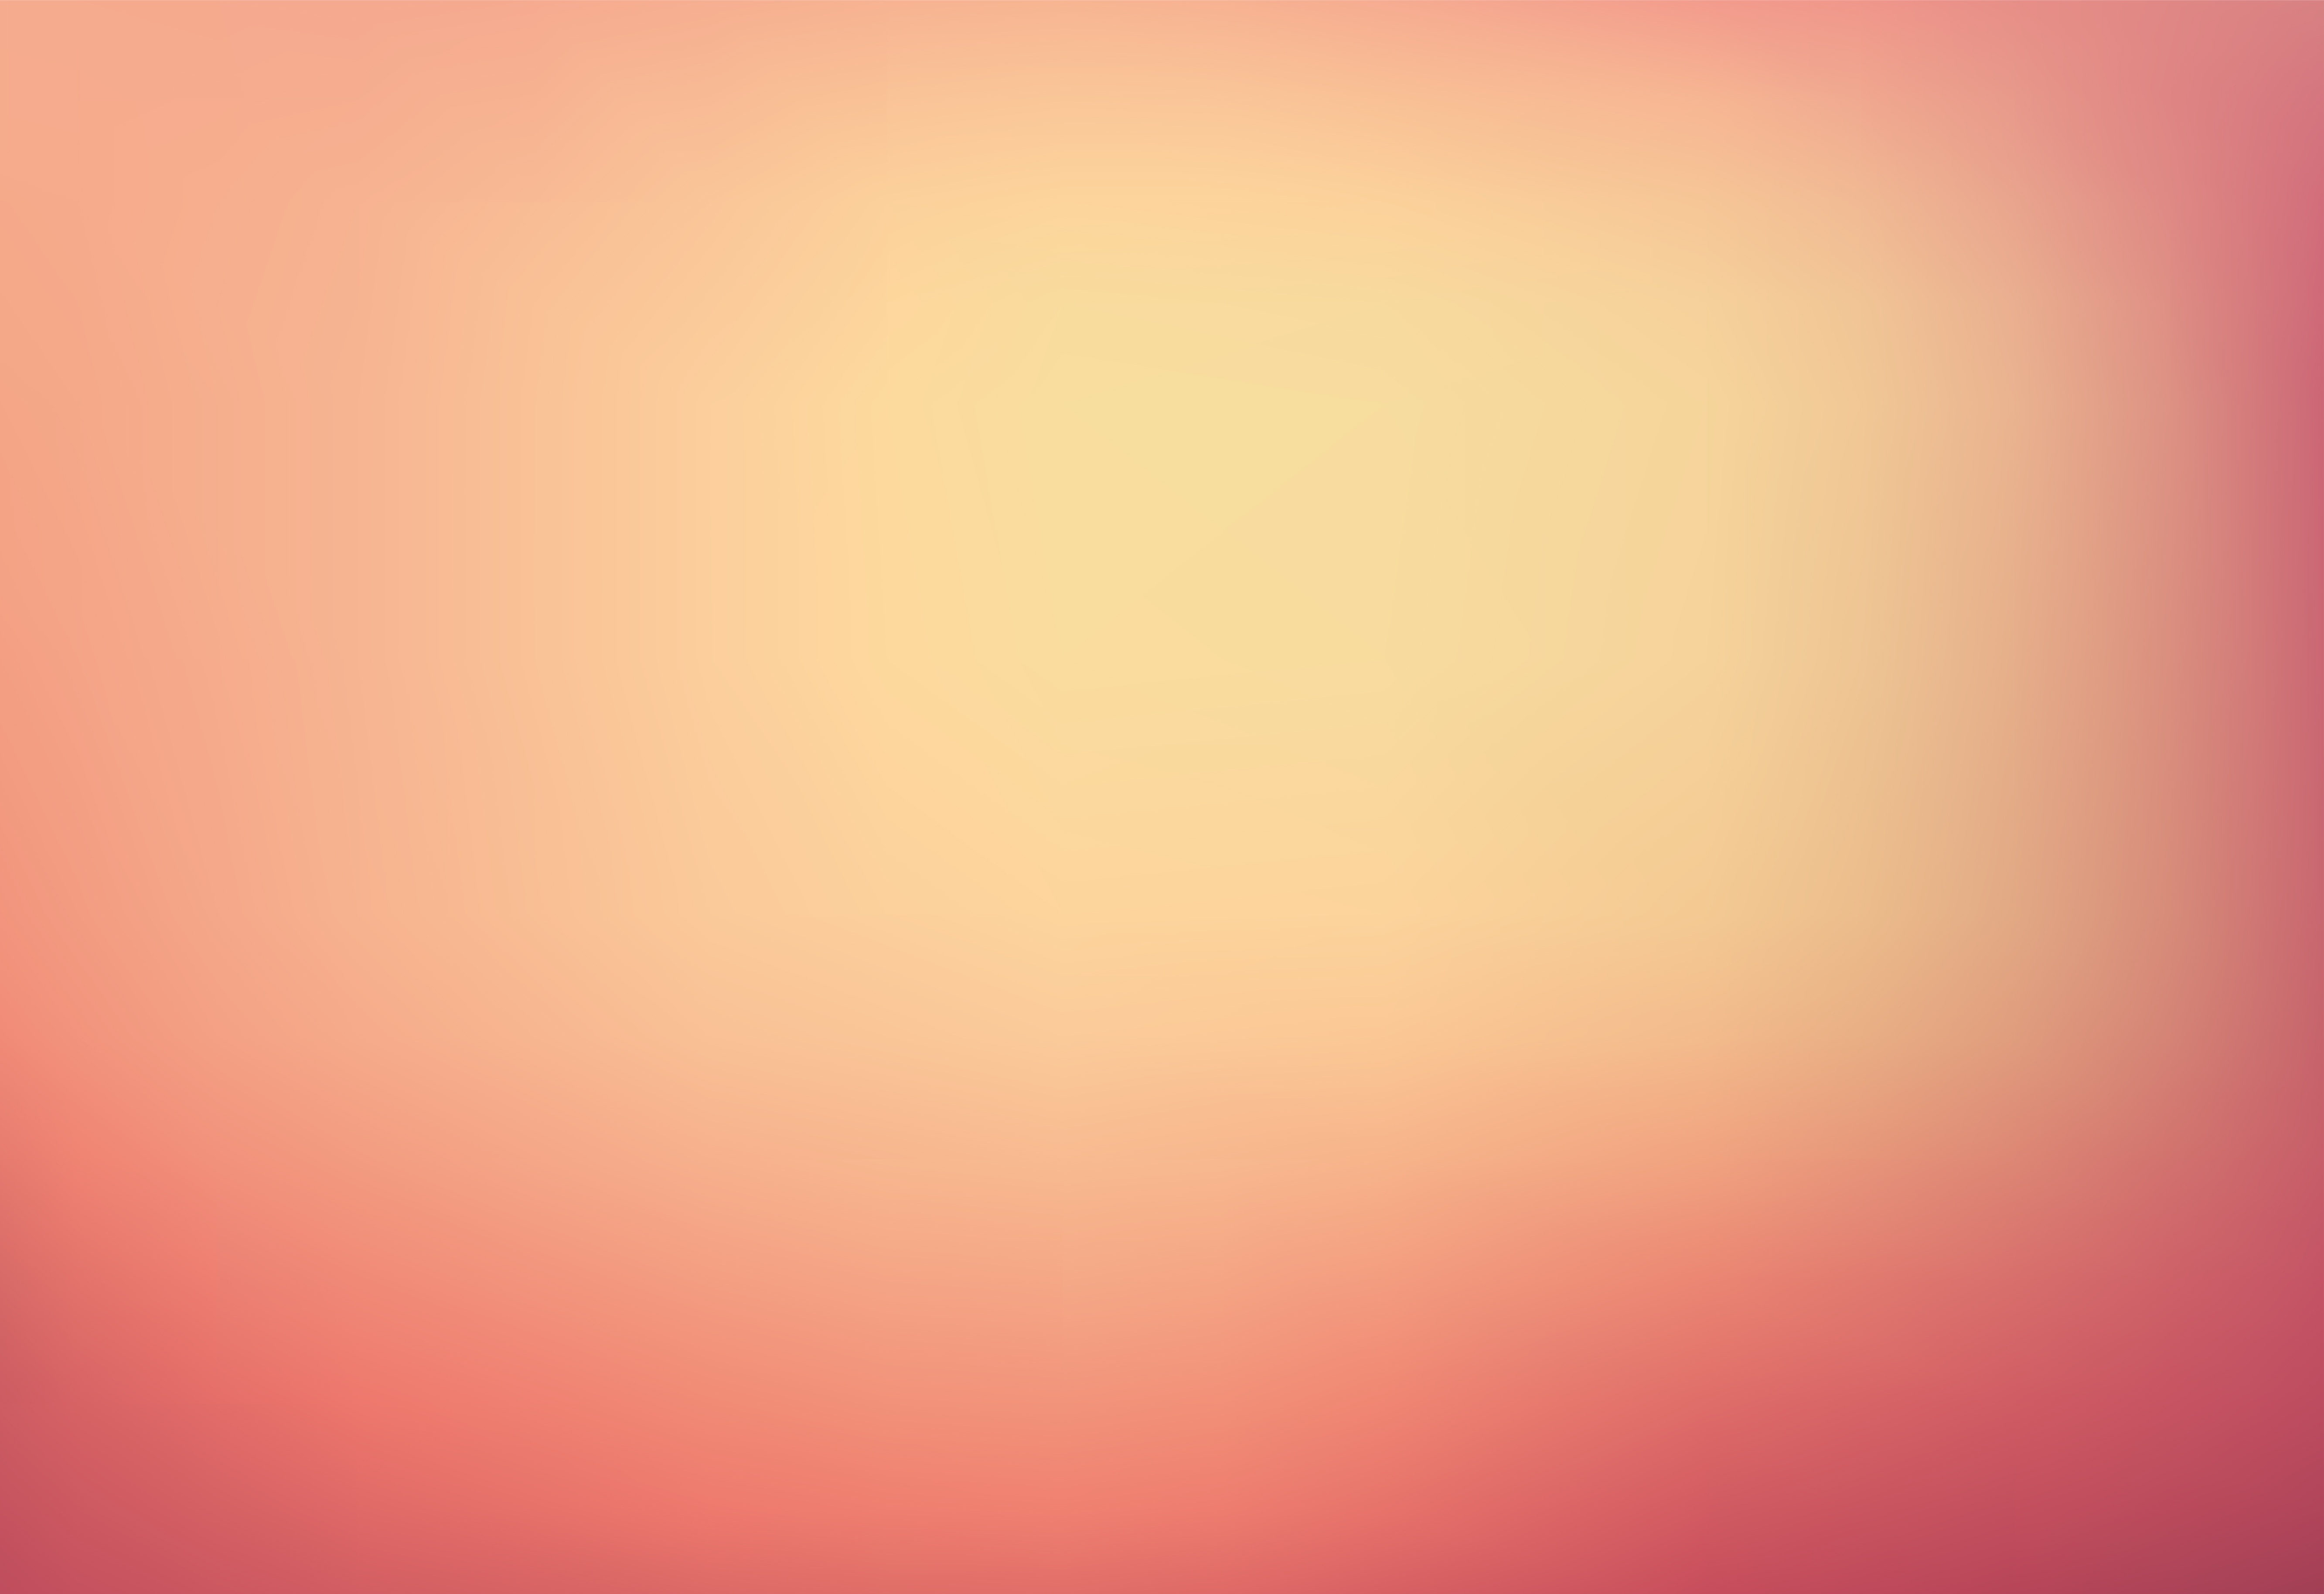 background, gradient, color, tender, pink, texture, textures, shades